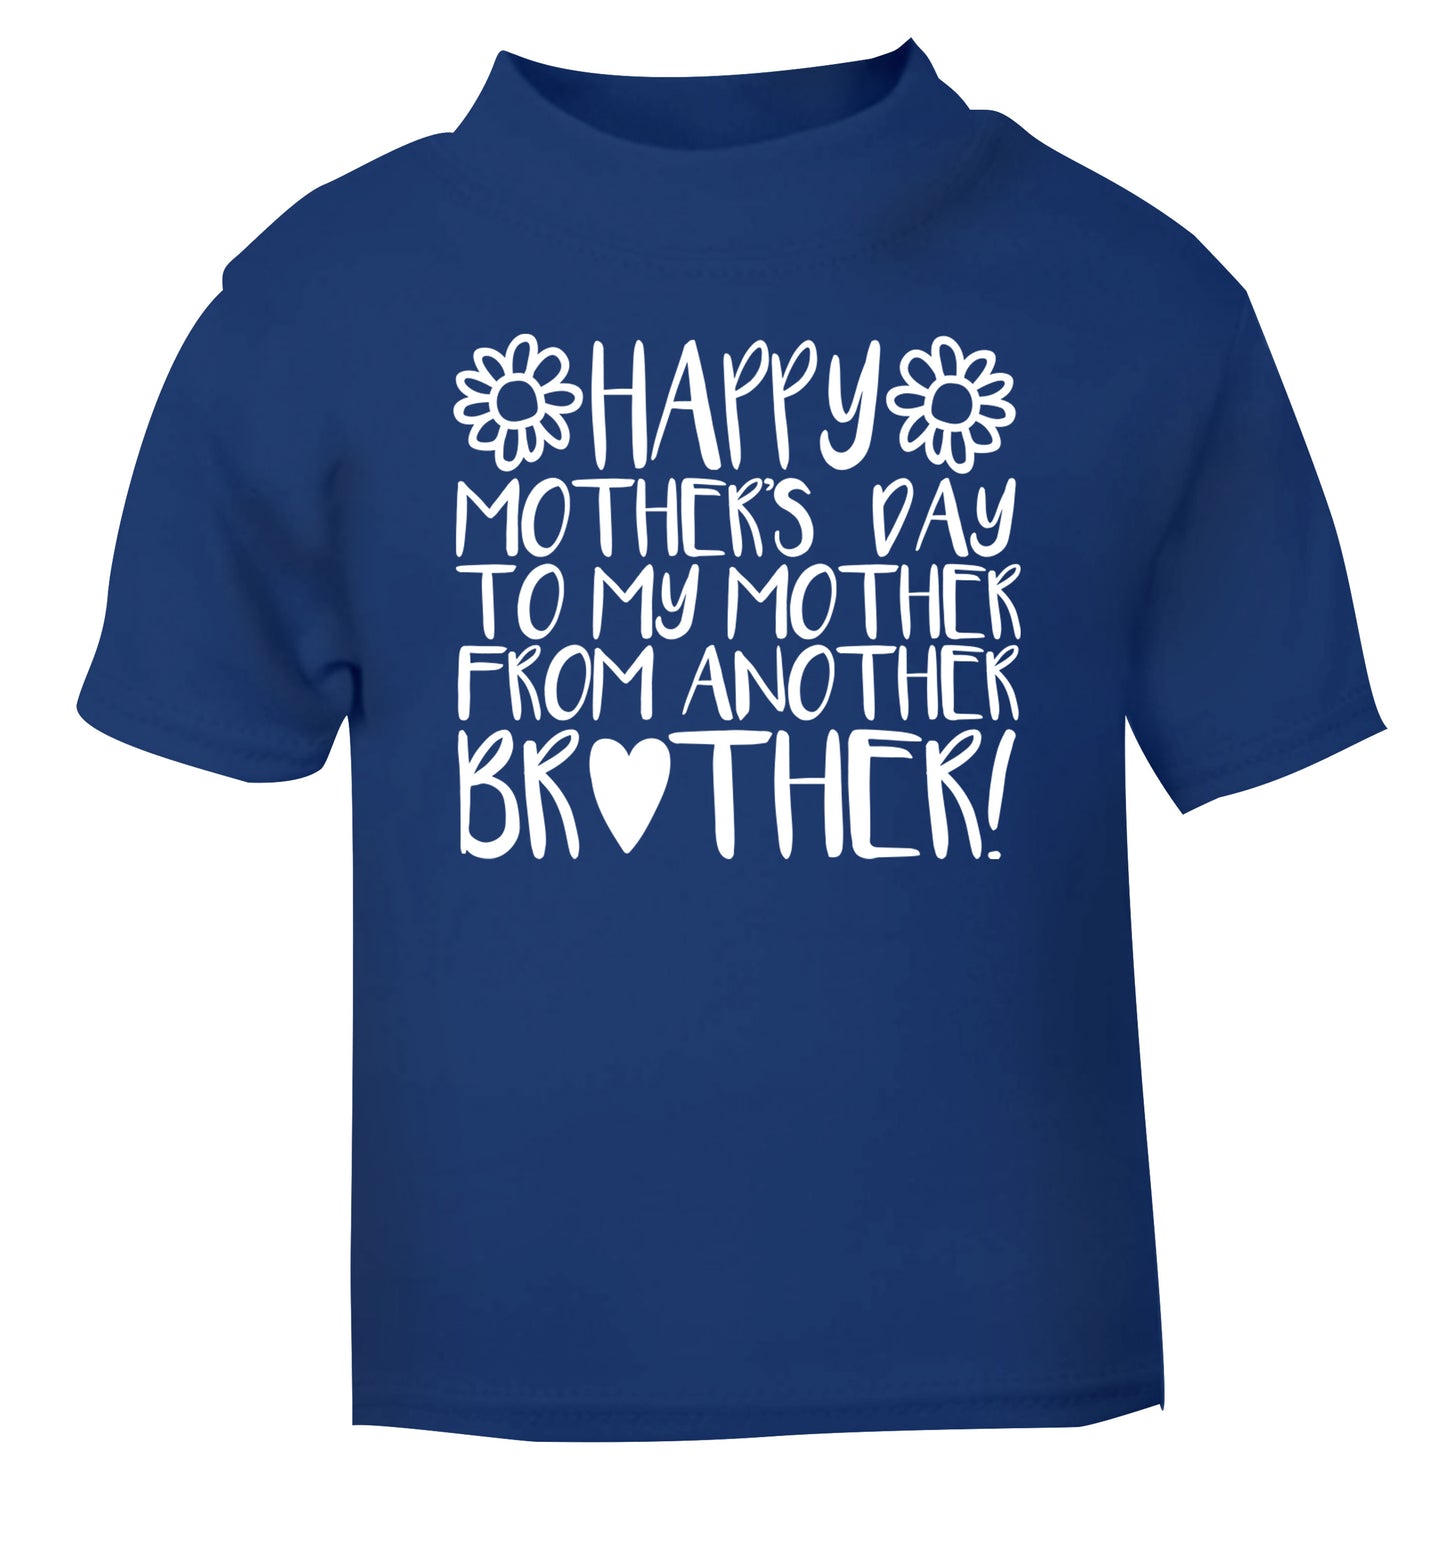 Happy mother's day to my mother from another brother blue Baby Toddler Tshirt 2 Years